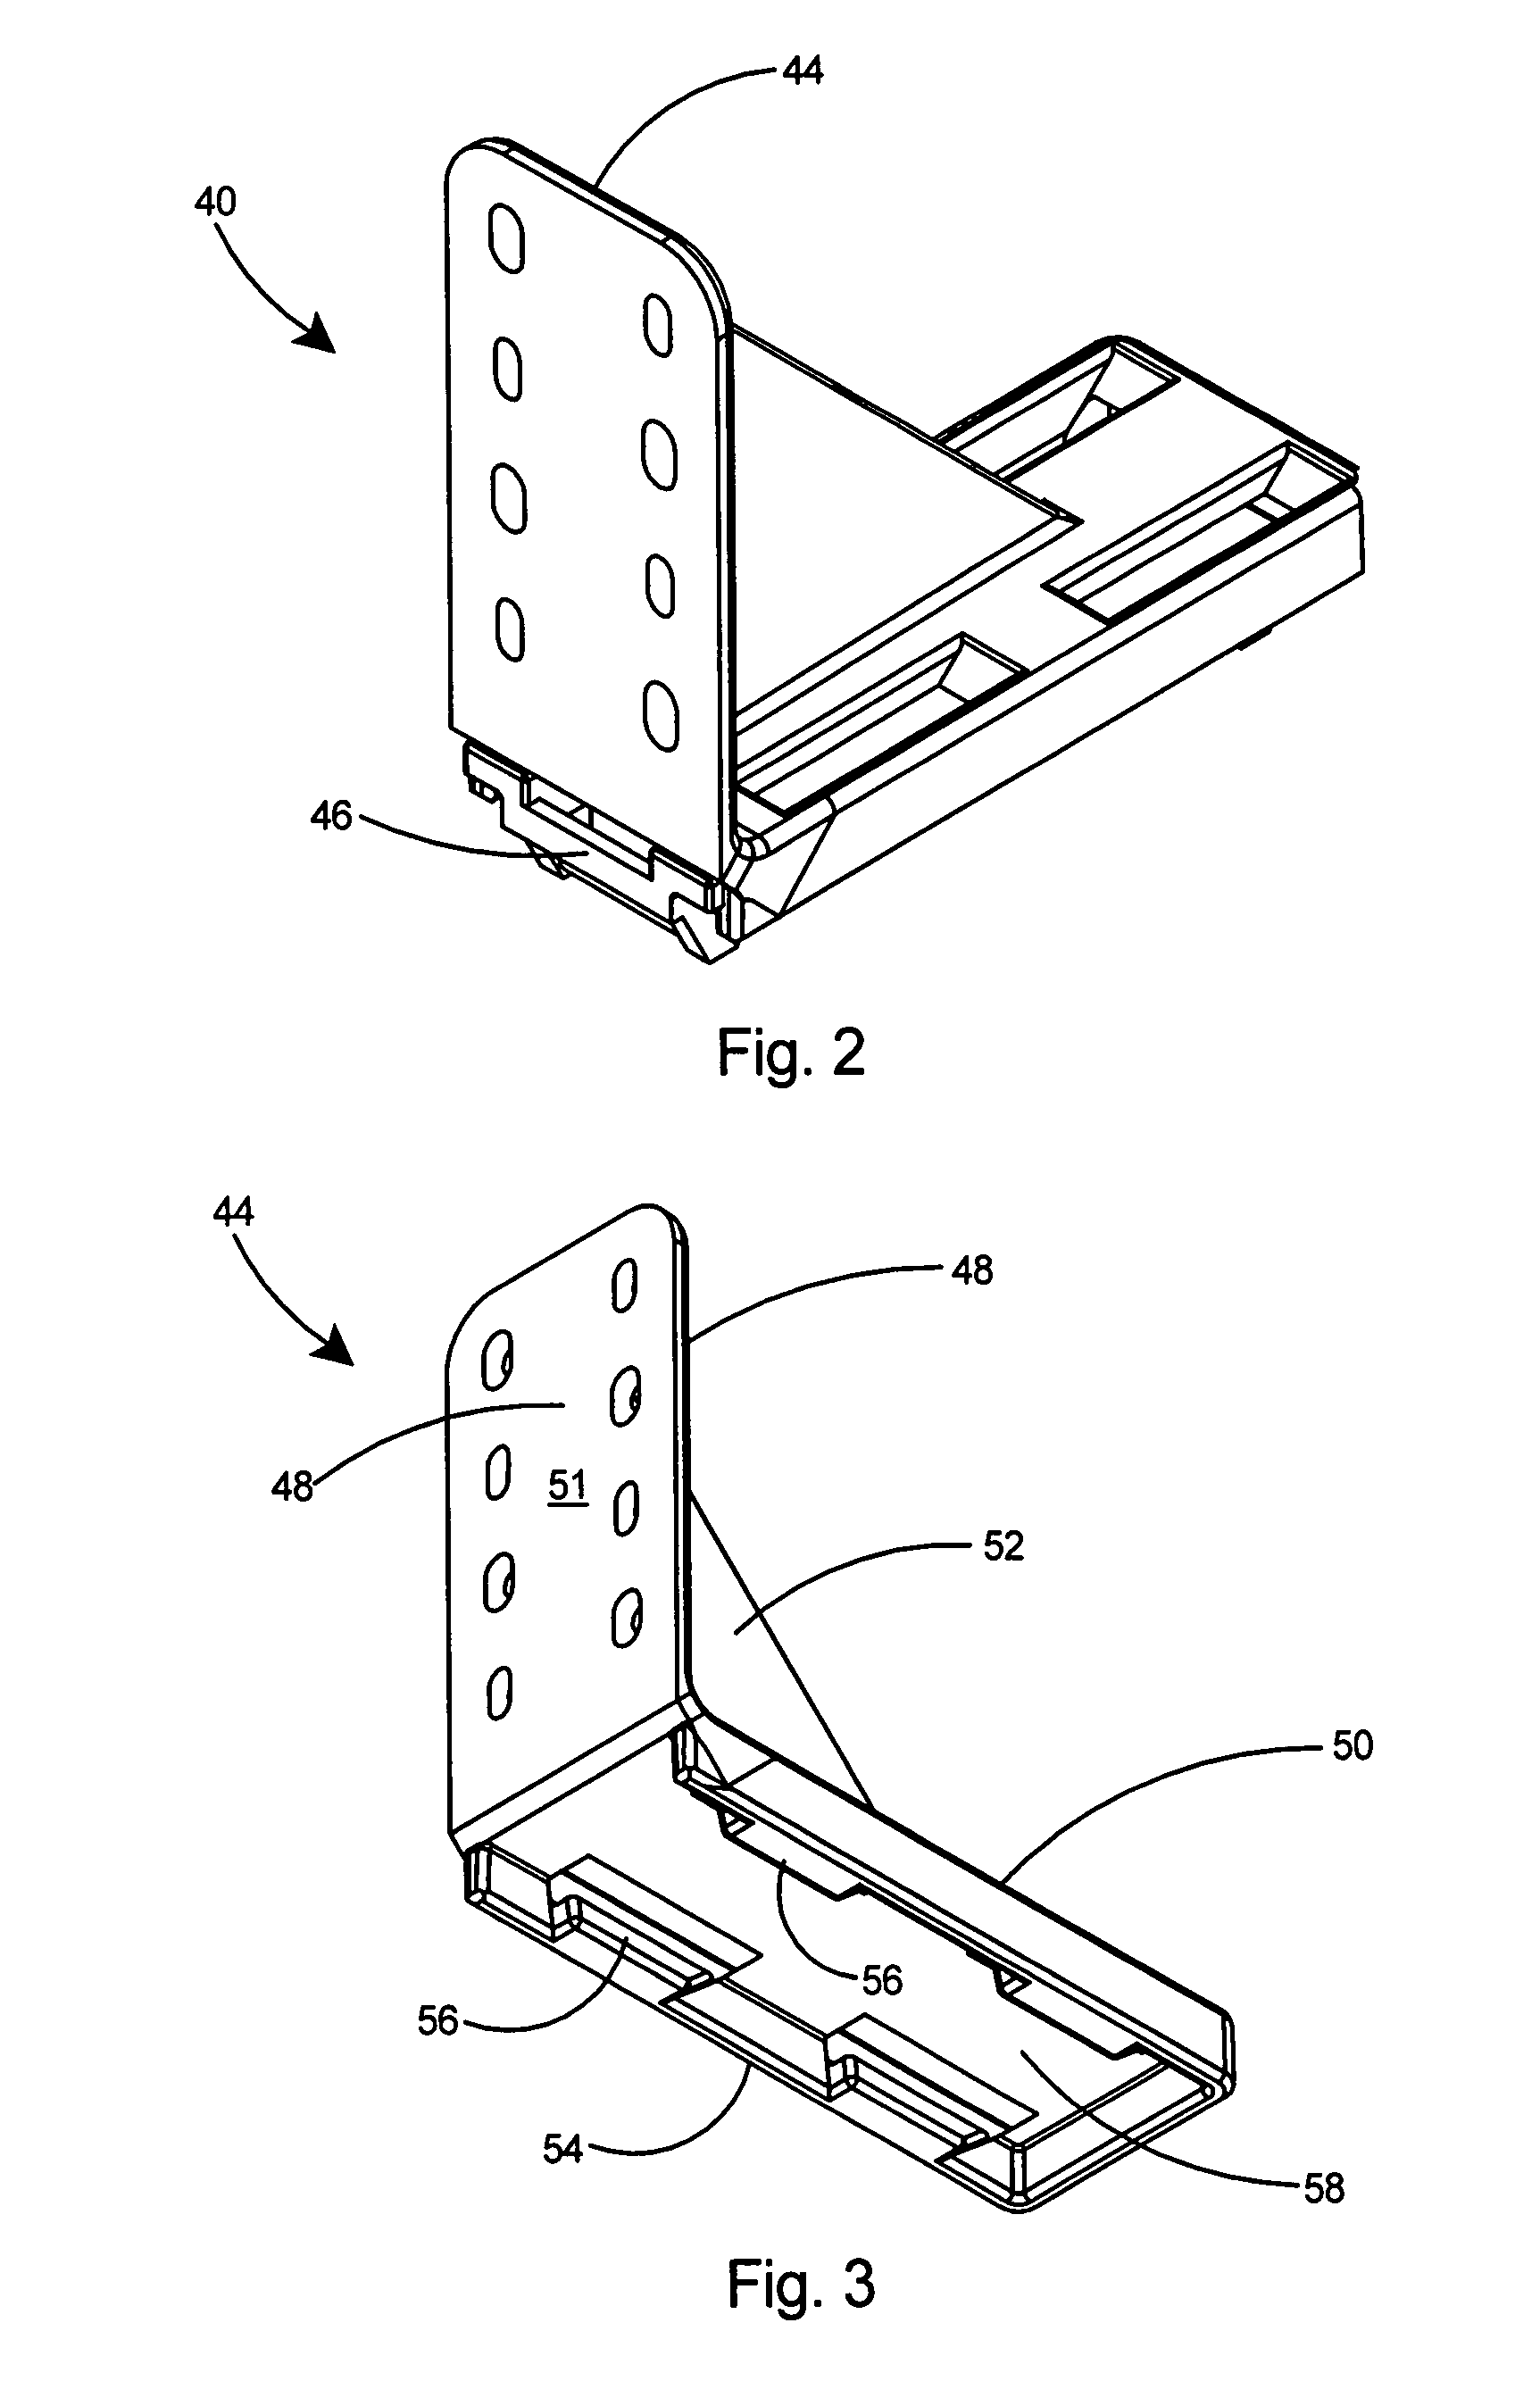 Cable support assembly for minimizing the bend radius of cables